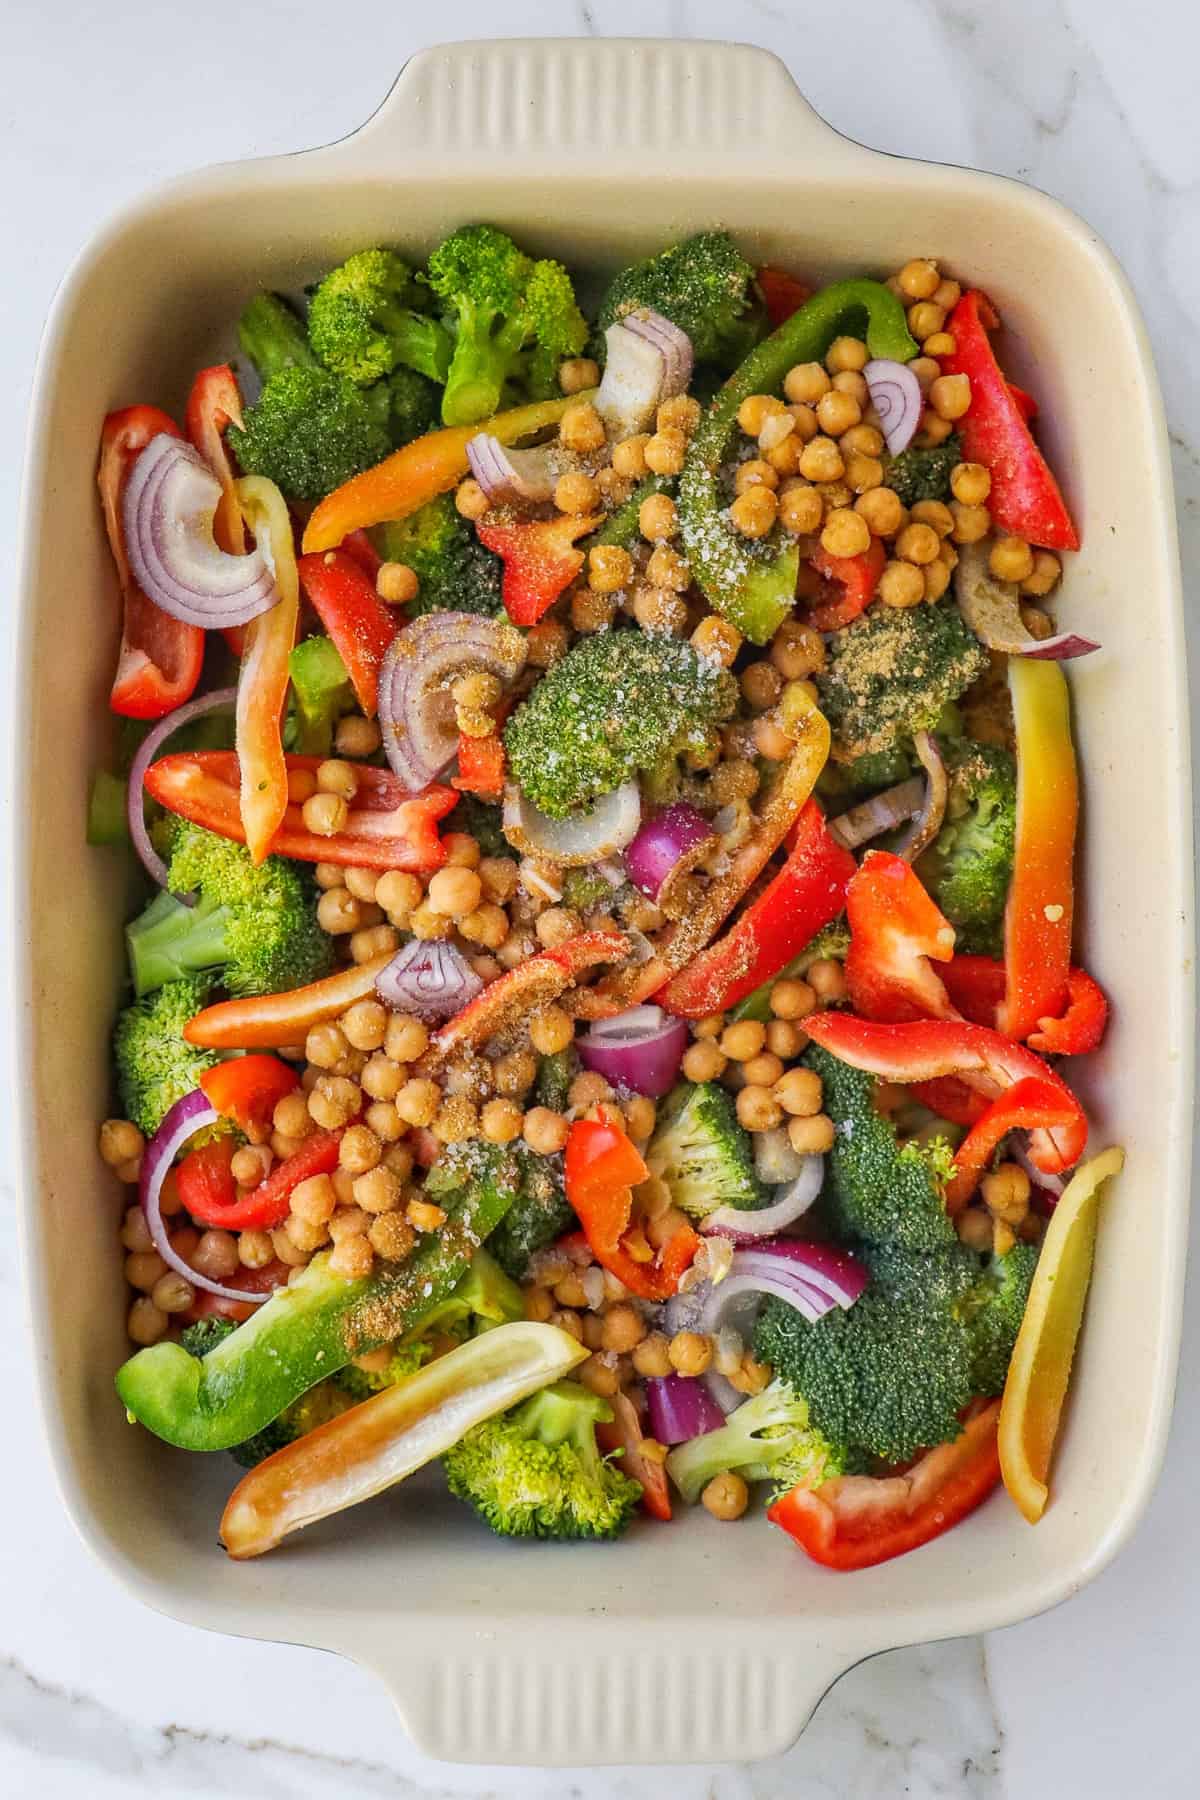 Unbaked chickpeas and veggies in dish before oven.